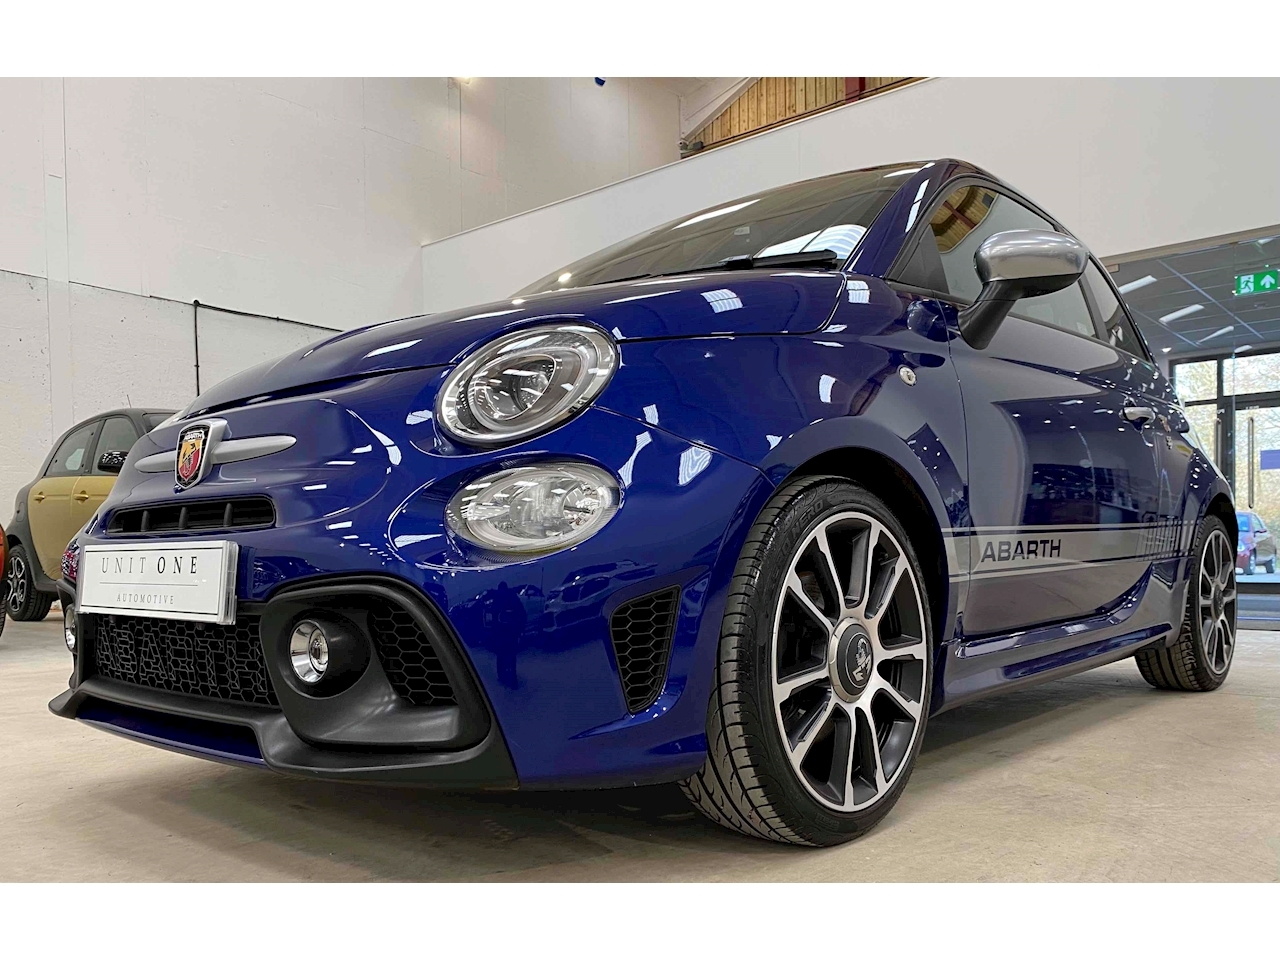 Used 2017 Abarth 595 Abarth 595 Turismo 1.4 Tjet 165hp 1.4 3dr Hatchback  Manual Petrol For Sale in West Sussex